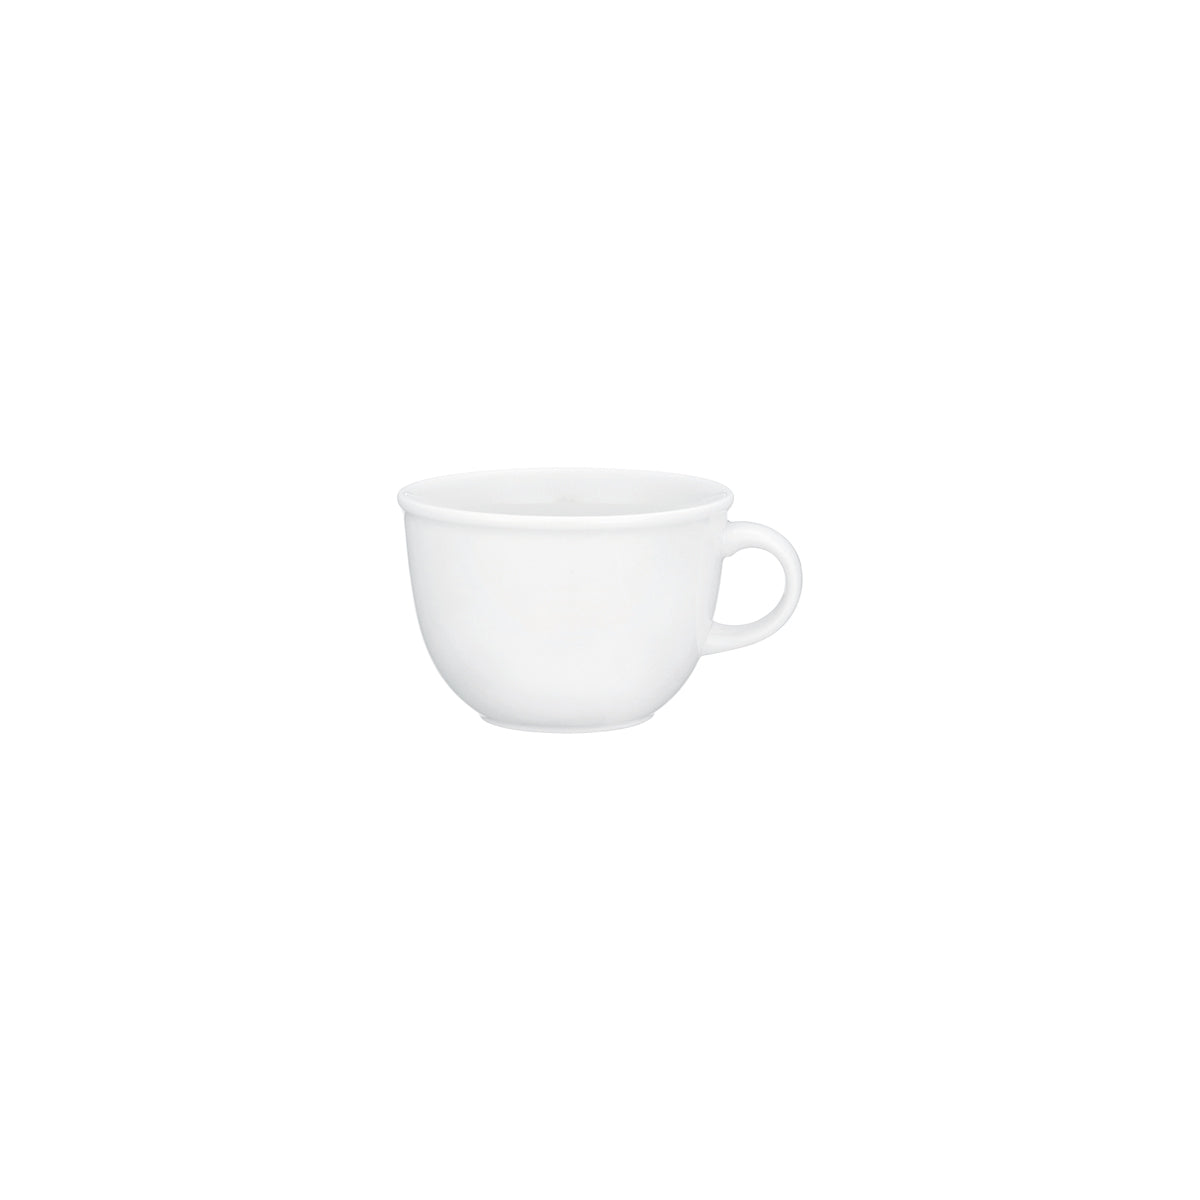 VB16-2016-1270 Villeroy And Boch Villeroy And Boch Corpo White Cup No. 2 220ml Tomkin Australia Hospitality Supplies